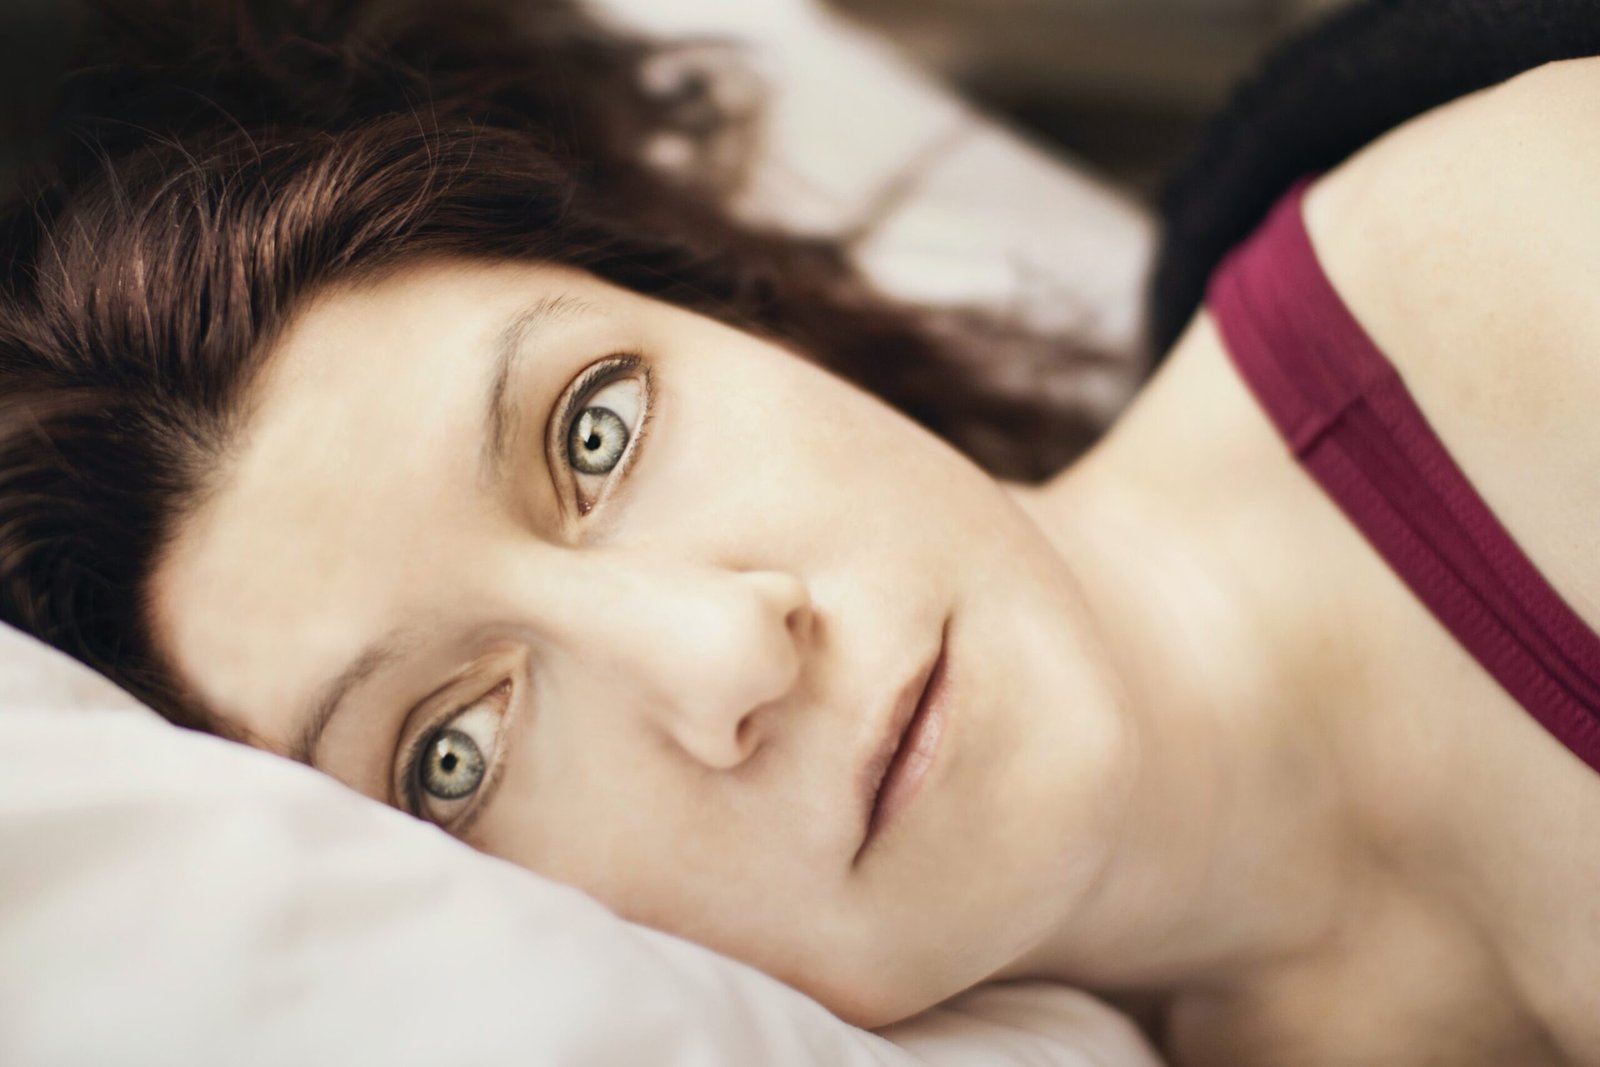 Study finds mild COVID 19 infections make insomnia more likely especially in people with anxiety or depression